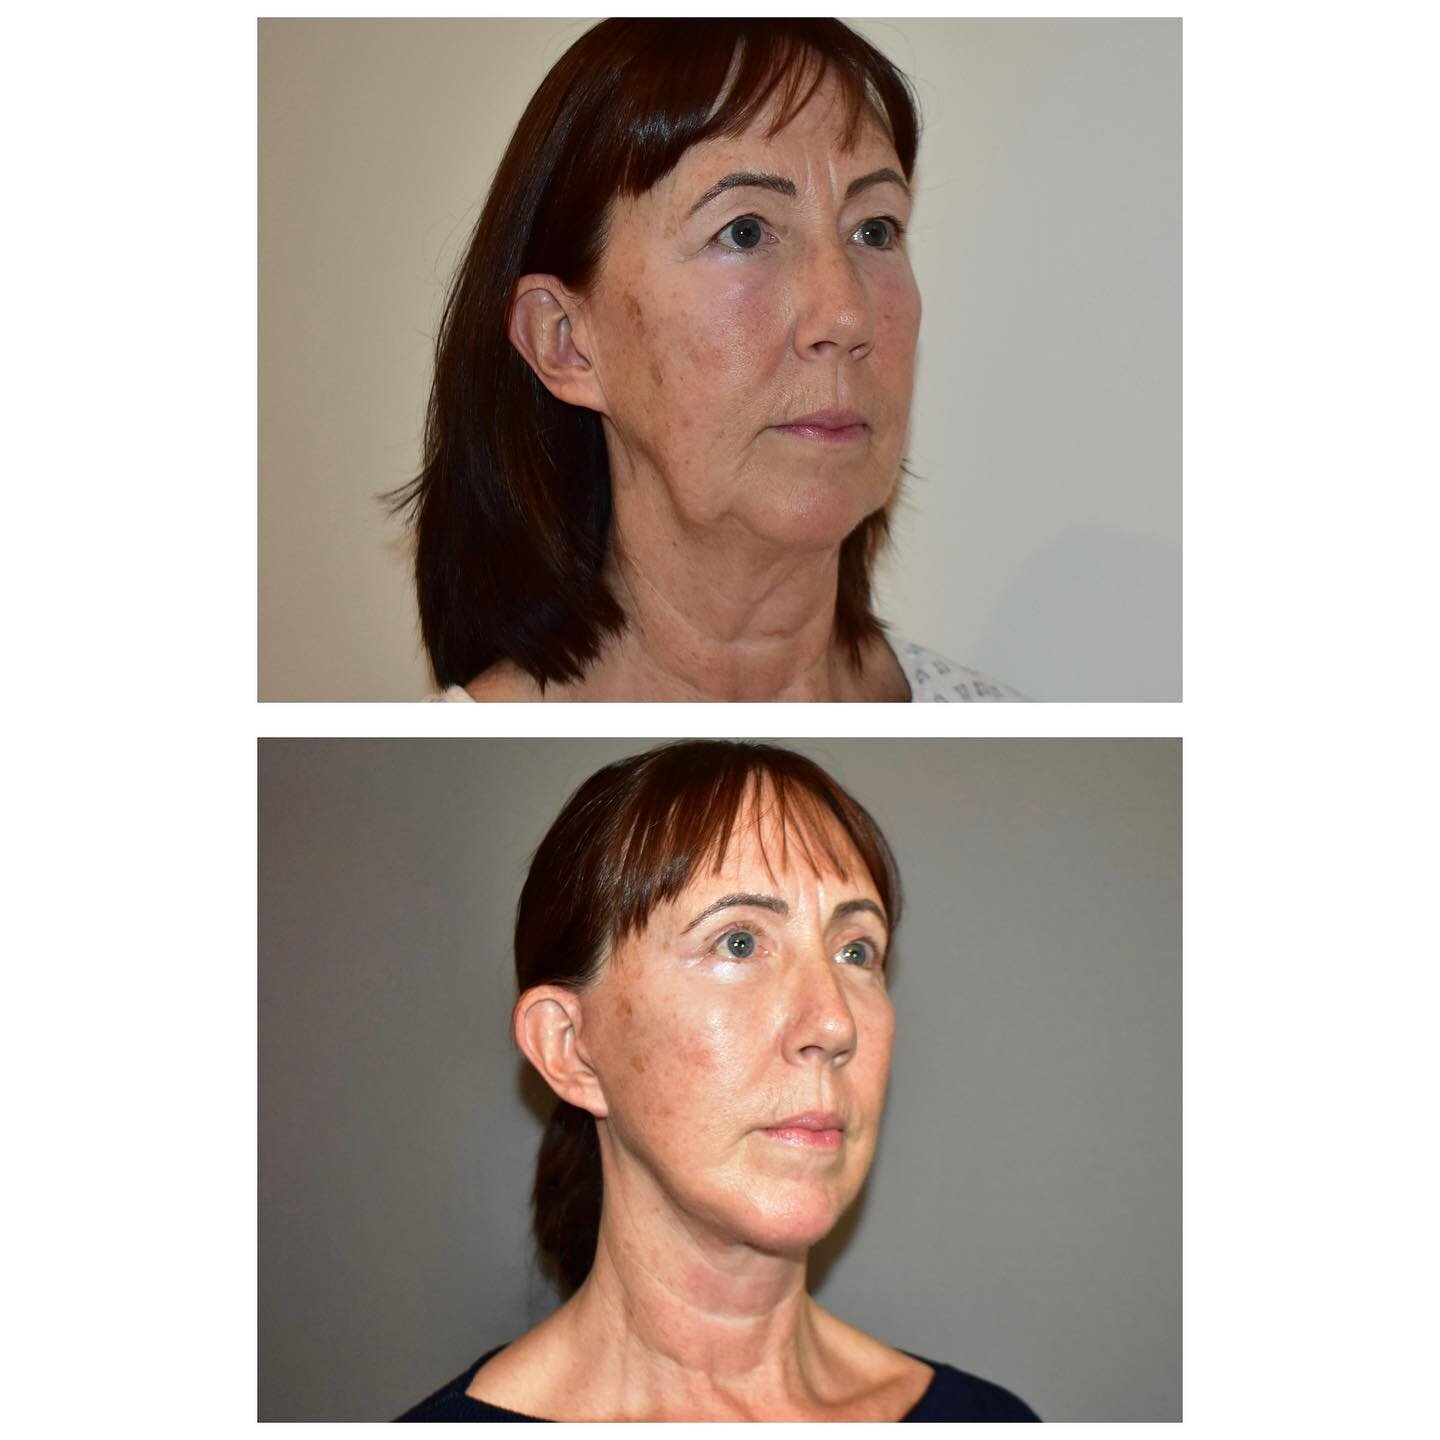 Another brilliant result of a Facelift and Upper and Lower Blepharoplasty. 

This procedure removes excess skin and fat on these facial areas, and tightens the remaining skin and tissues for a smoother and younger-looking appearance. 

Blepharoplasty